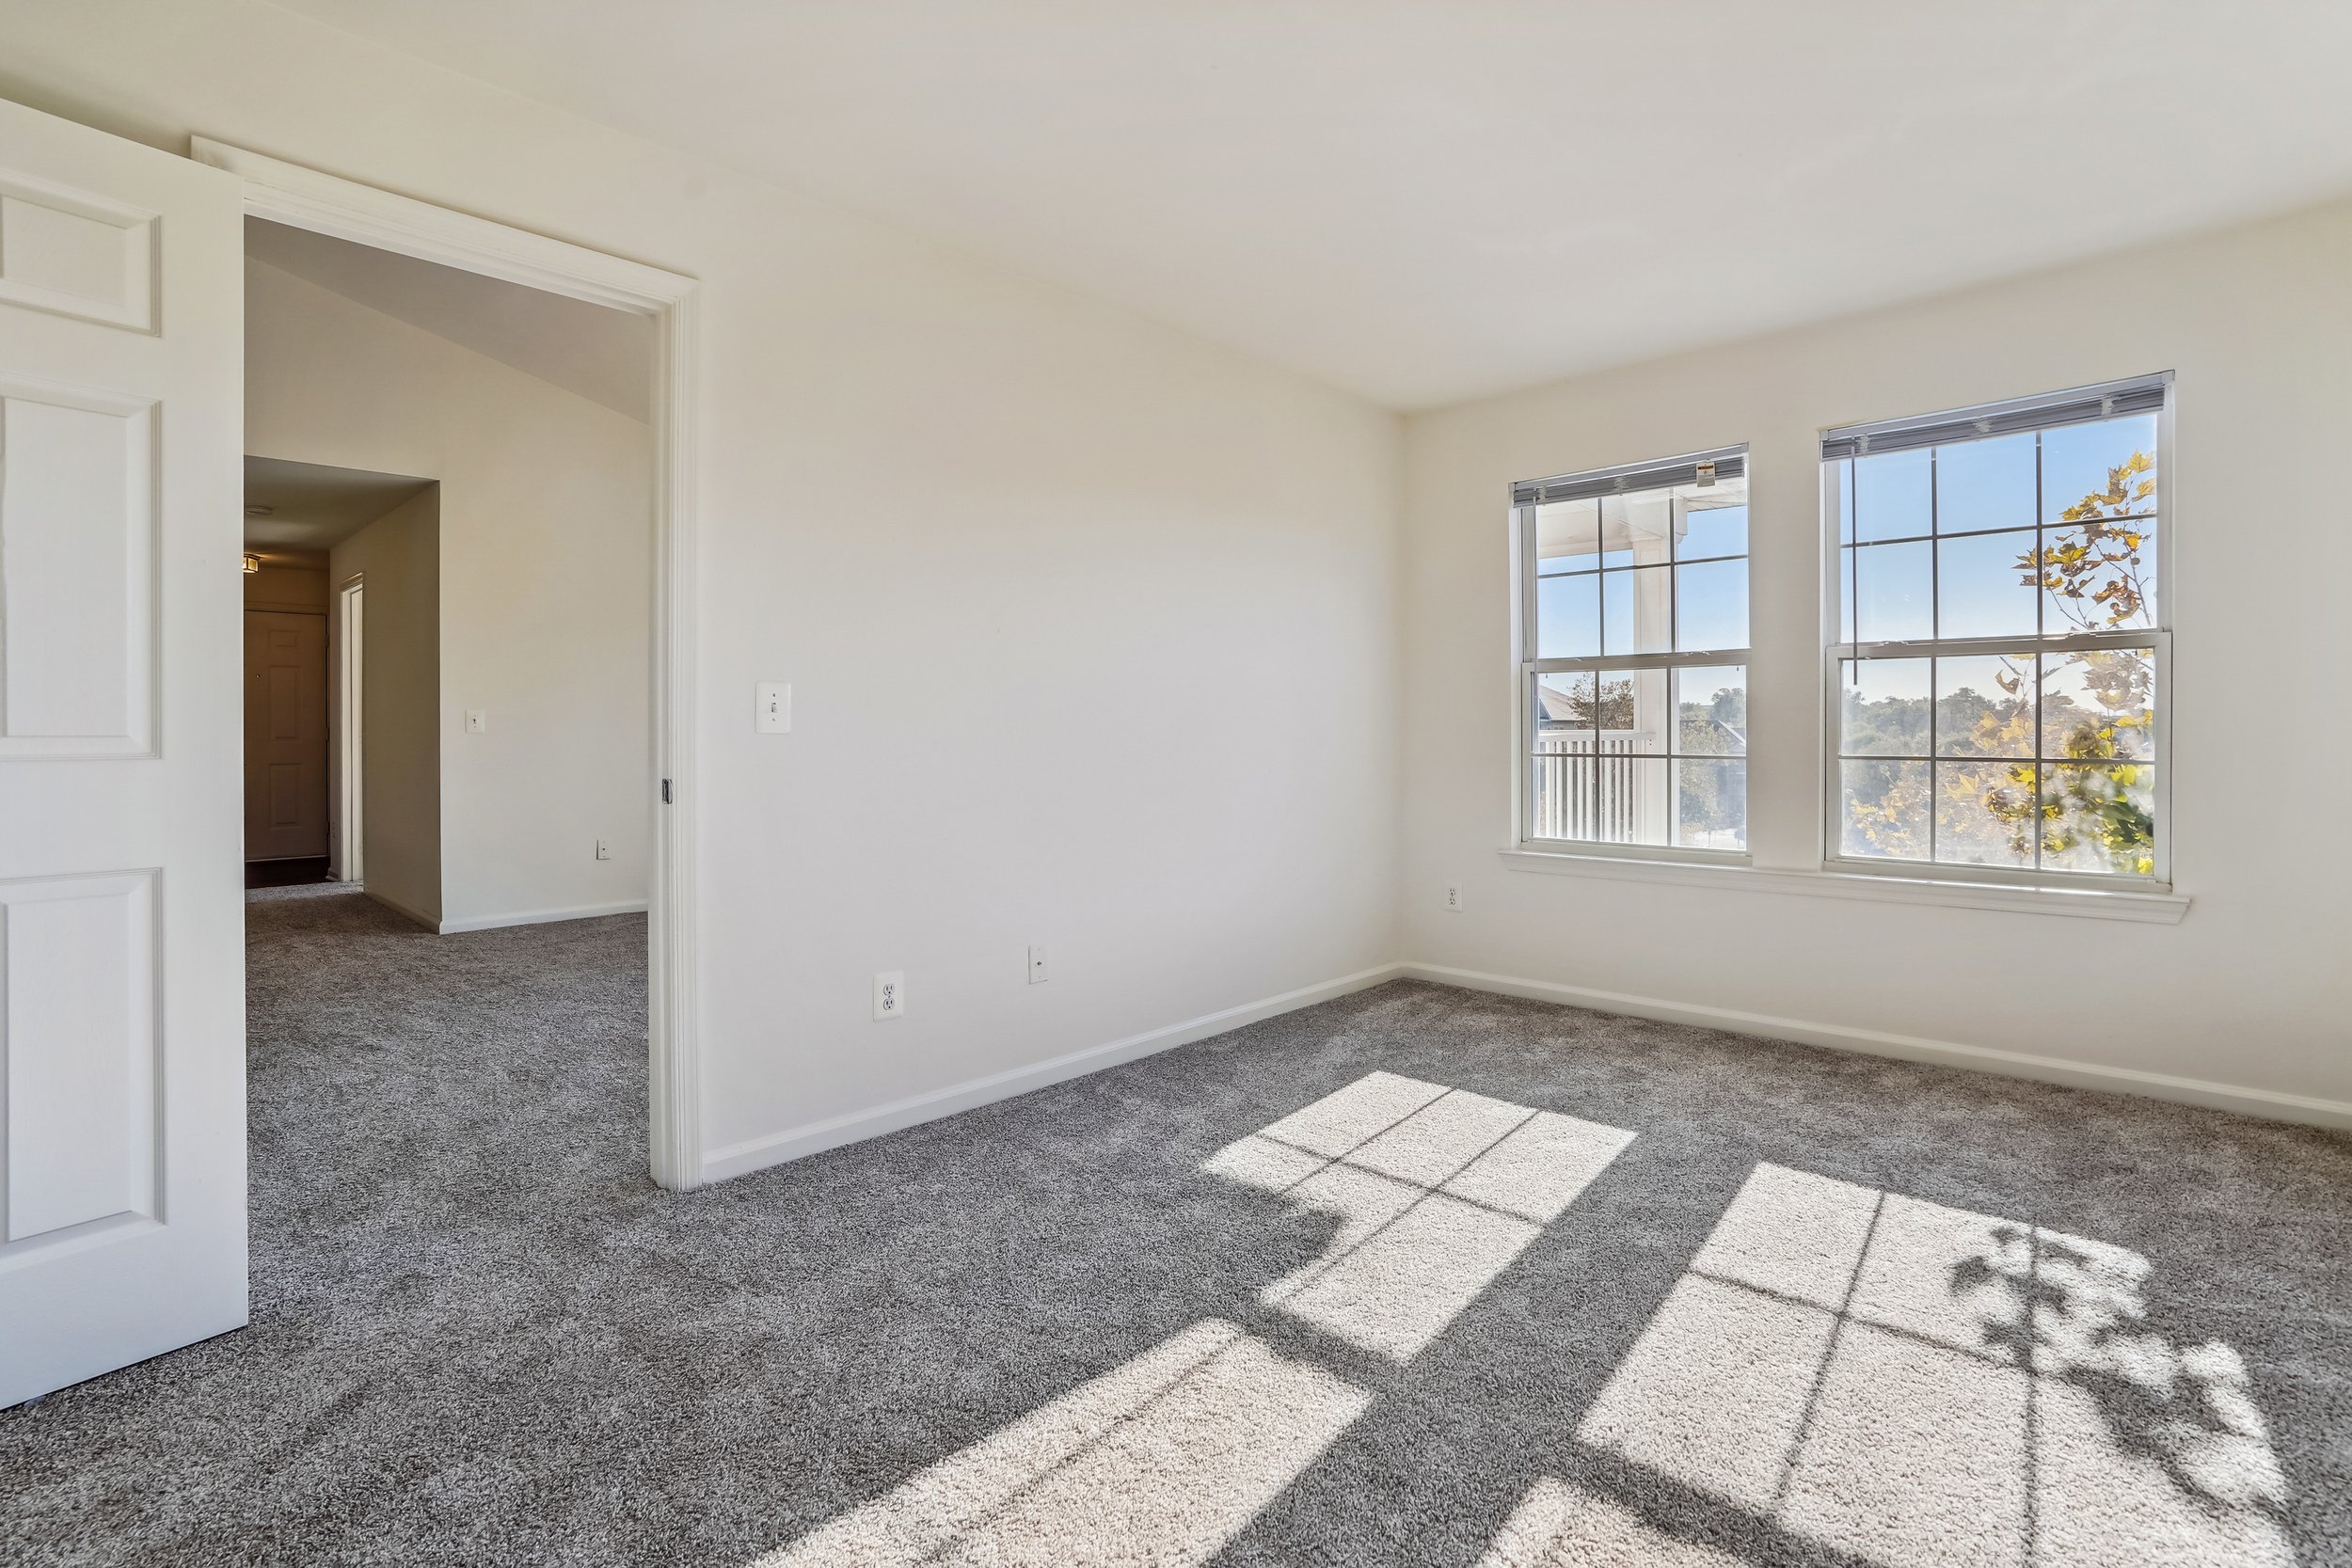  We offer spacious 2- and 3- bedroom floor plans at Ashburn Meadows. 